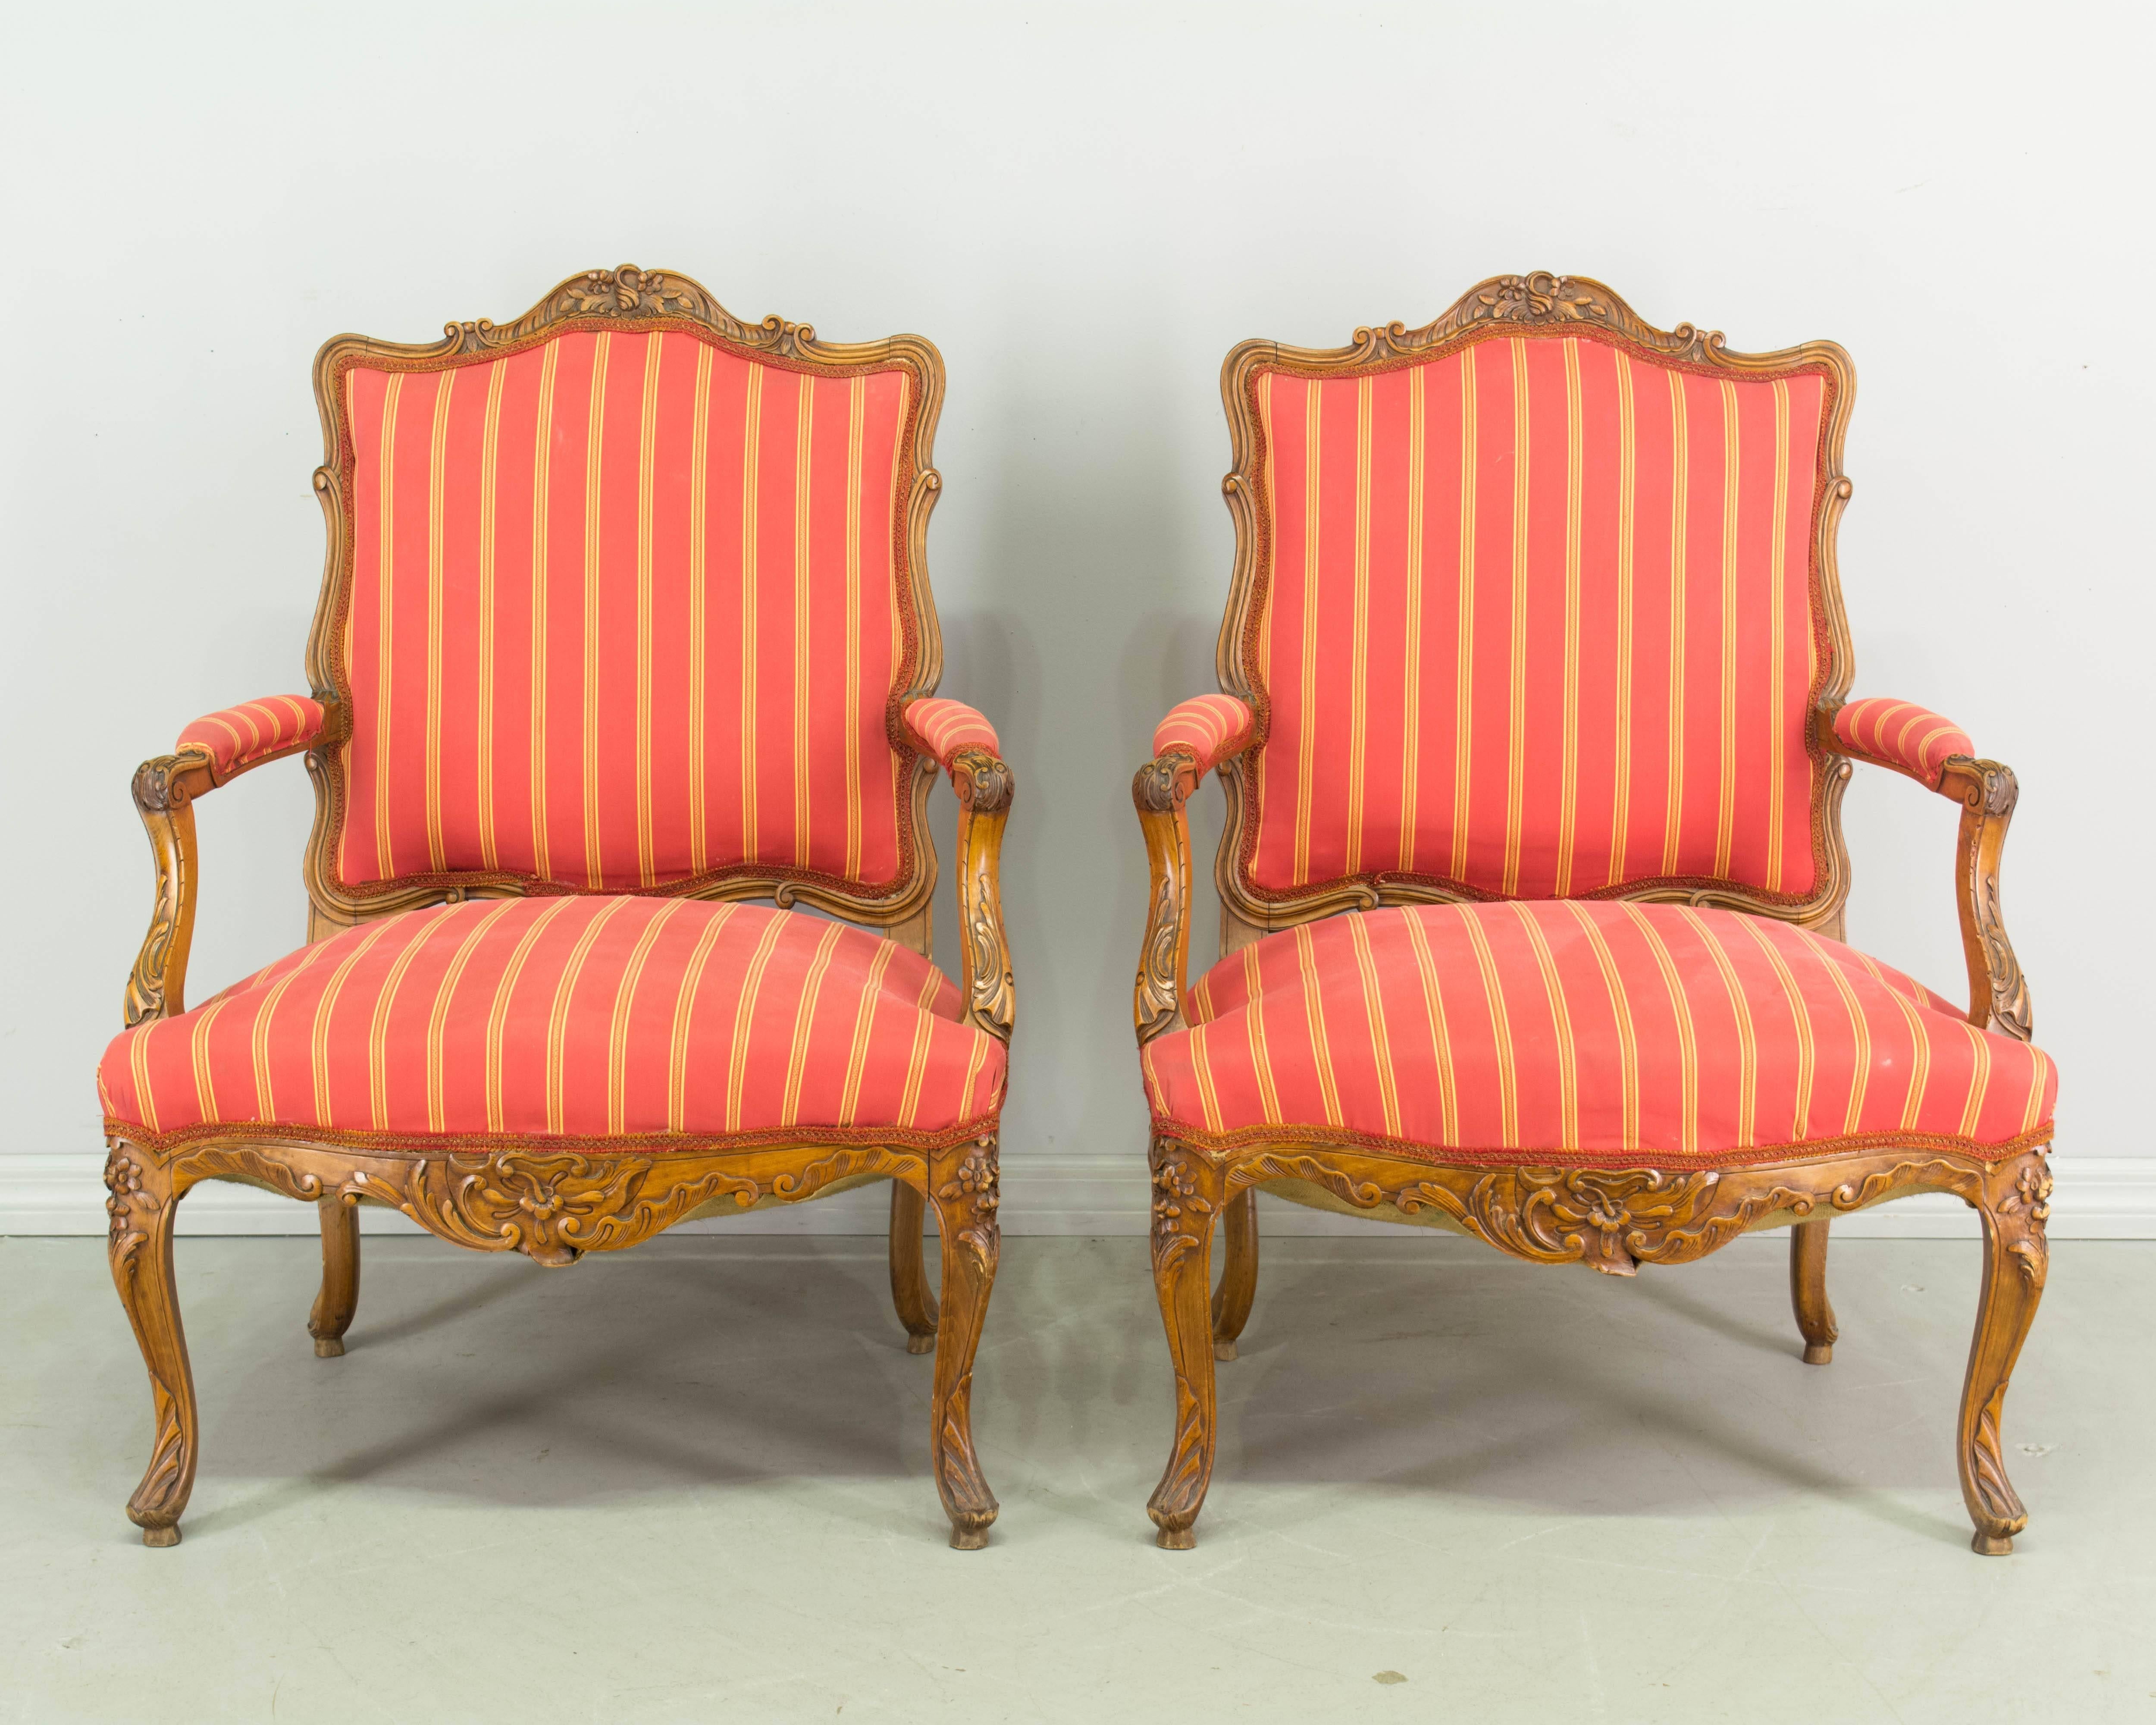 A suite of four Louis XV style chairs, including two fauteuils and two side chairs. Walnut frames with fine, hand-carved details. Sturdy and comfortable. Upholstery is old with one of the side chairs having a stained seat. 
Armchairs: 28" W x